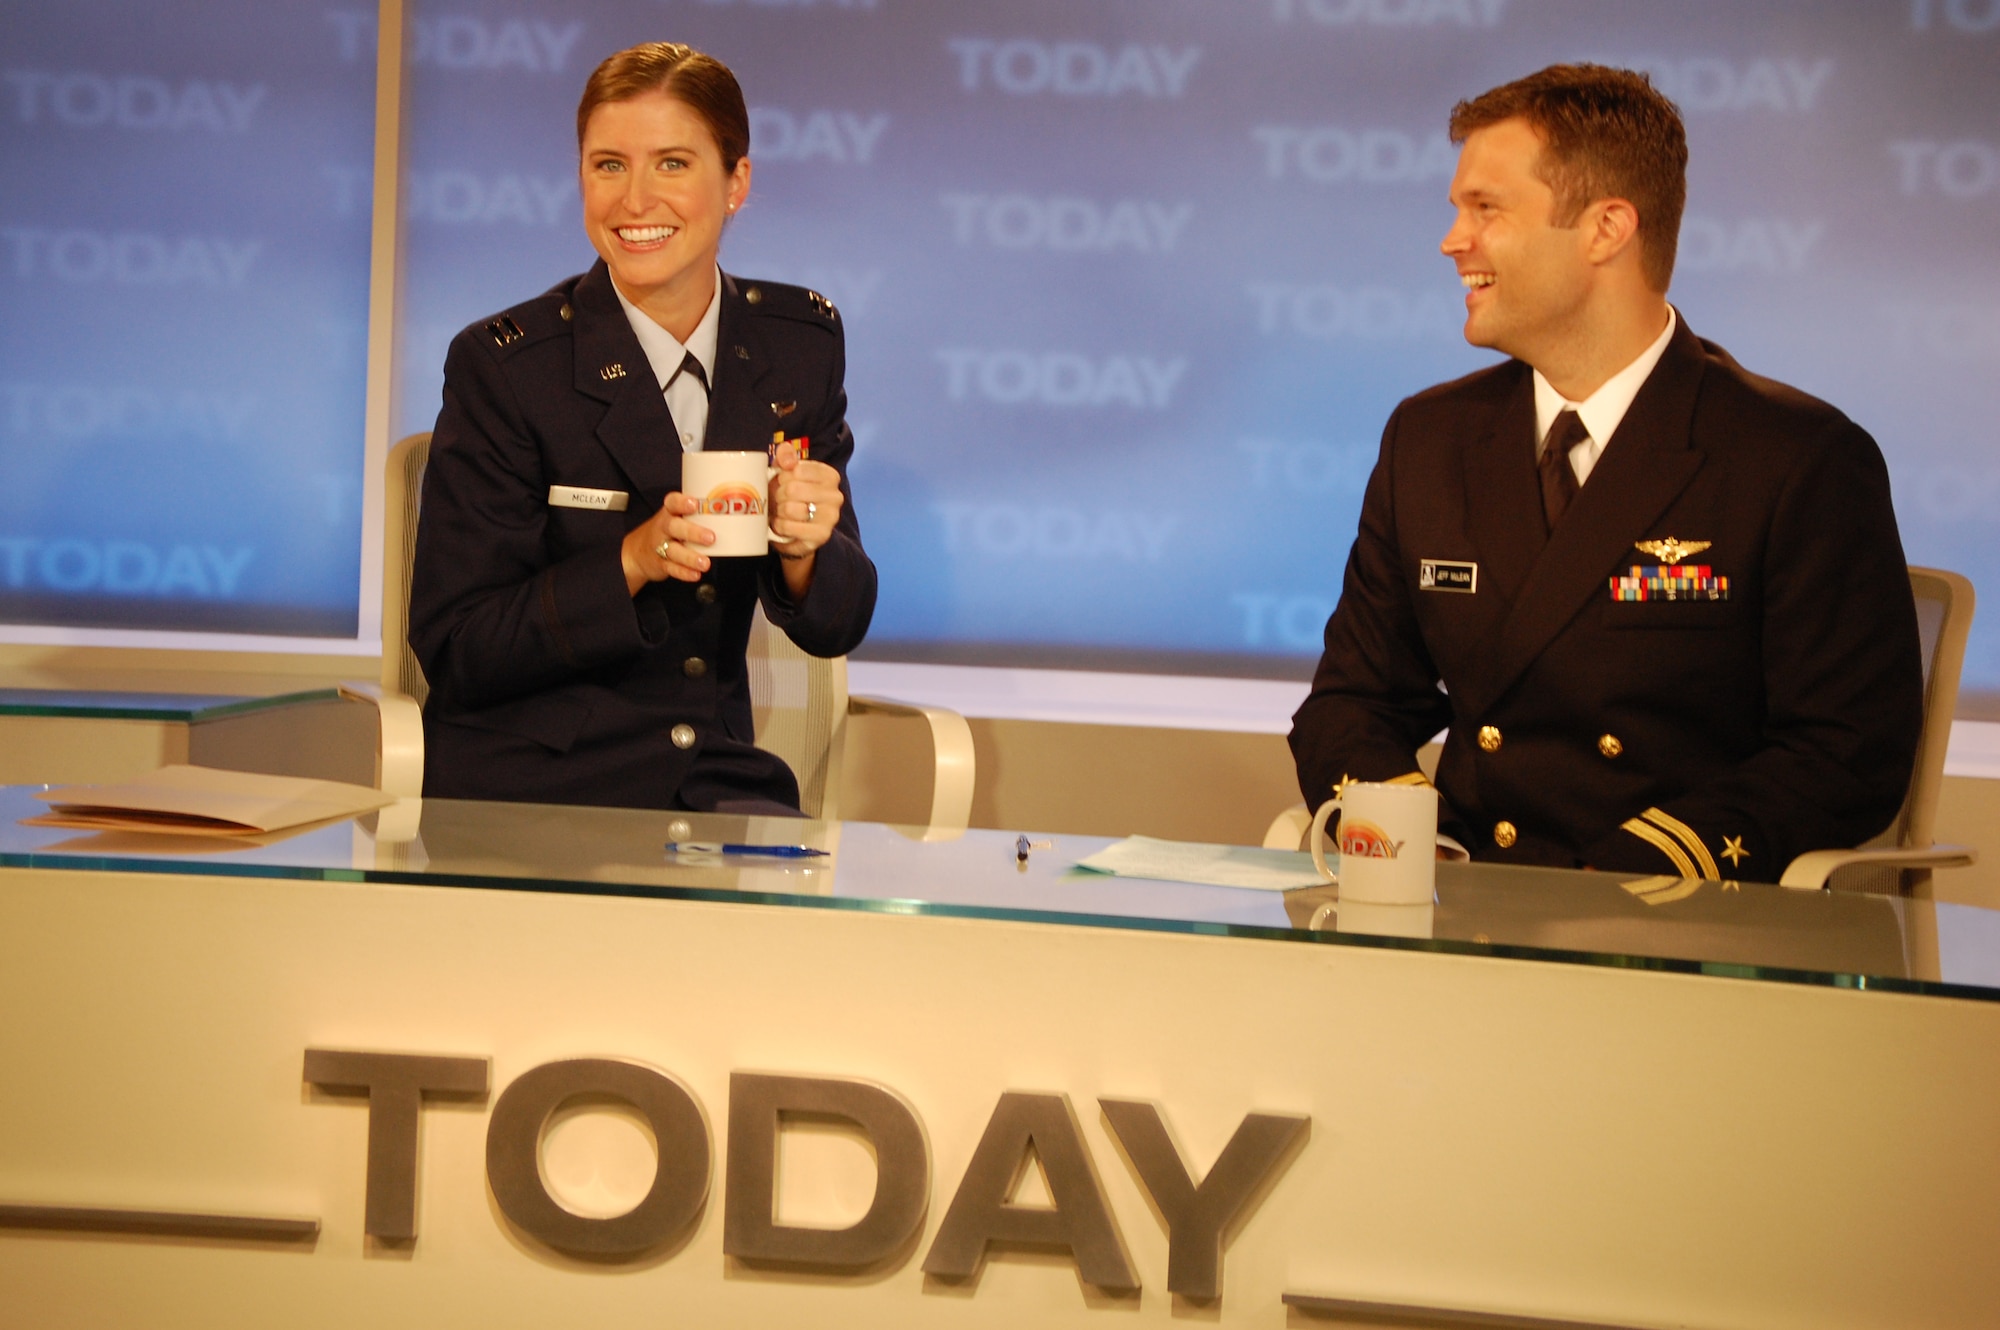 Move over Matt and Meredith, Jeff and Christine are taking over! The couple had a good time behind the scenes of the Today show after their interview with Lester Holt on Sunday, Aug 1. (USAF photo by Maj. Shannon Mann, 916ARW/PA)